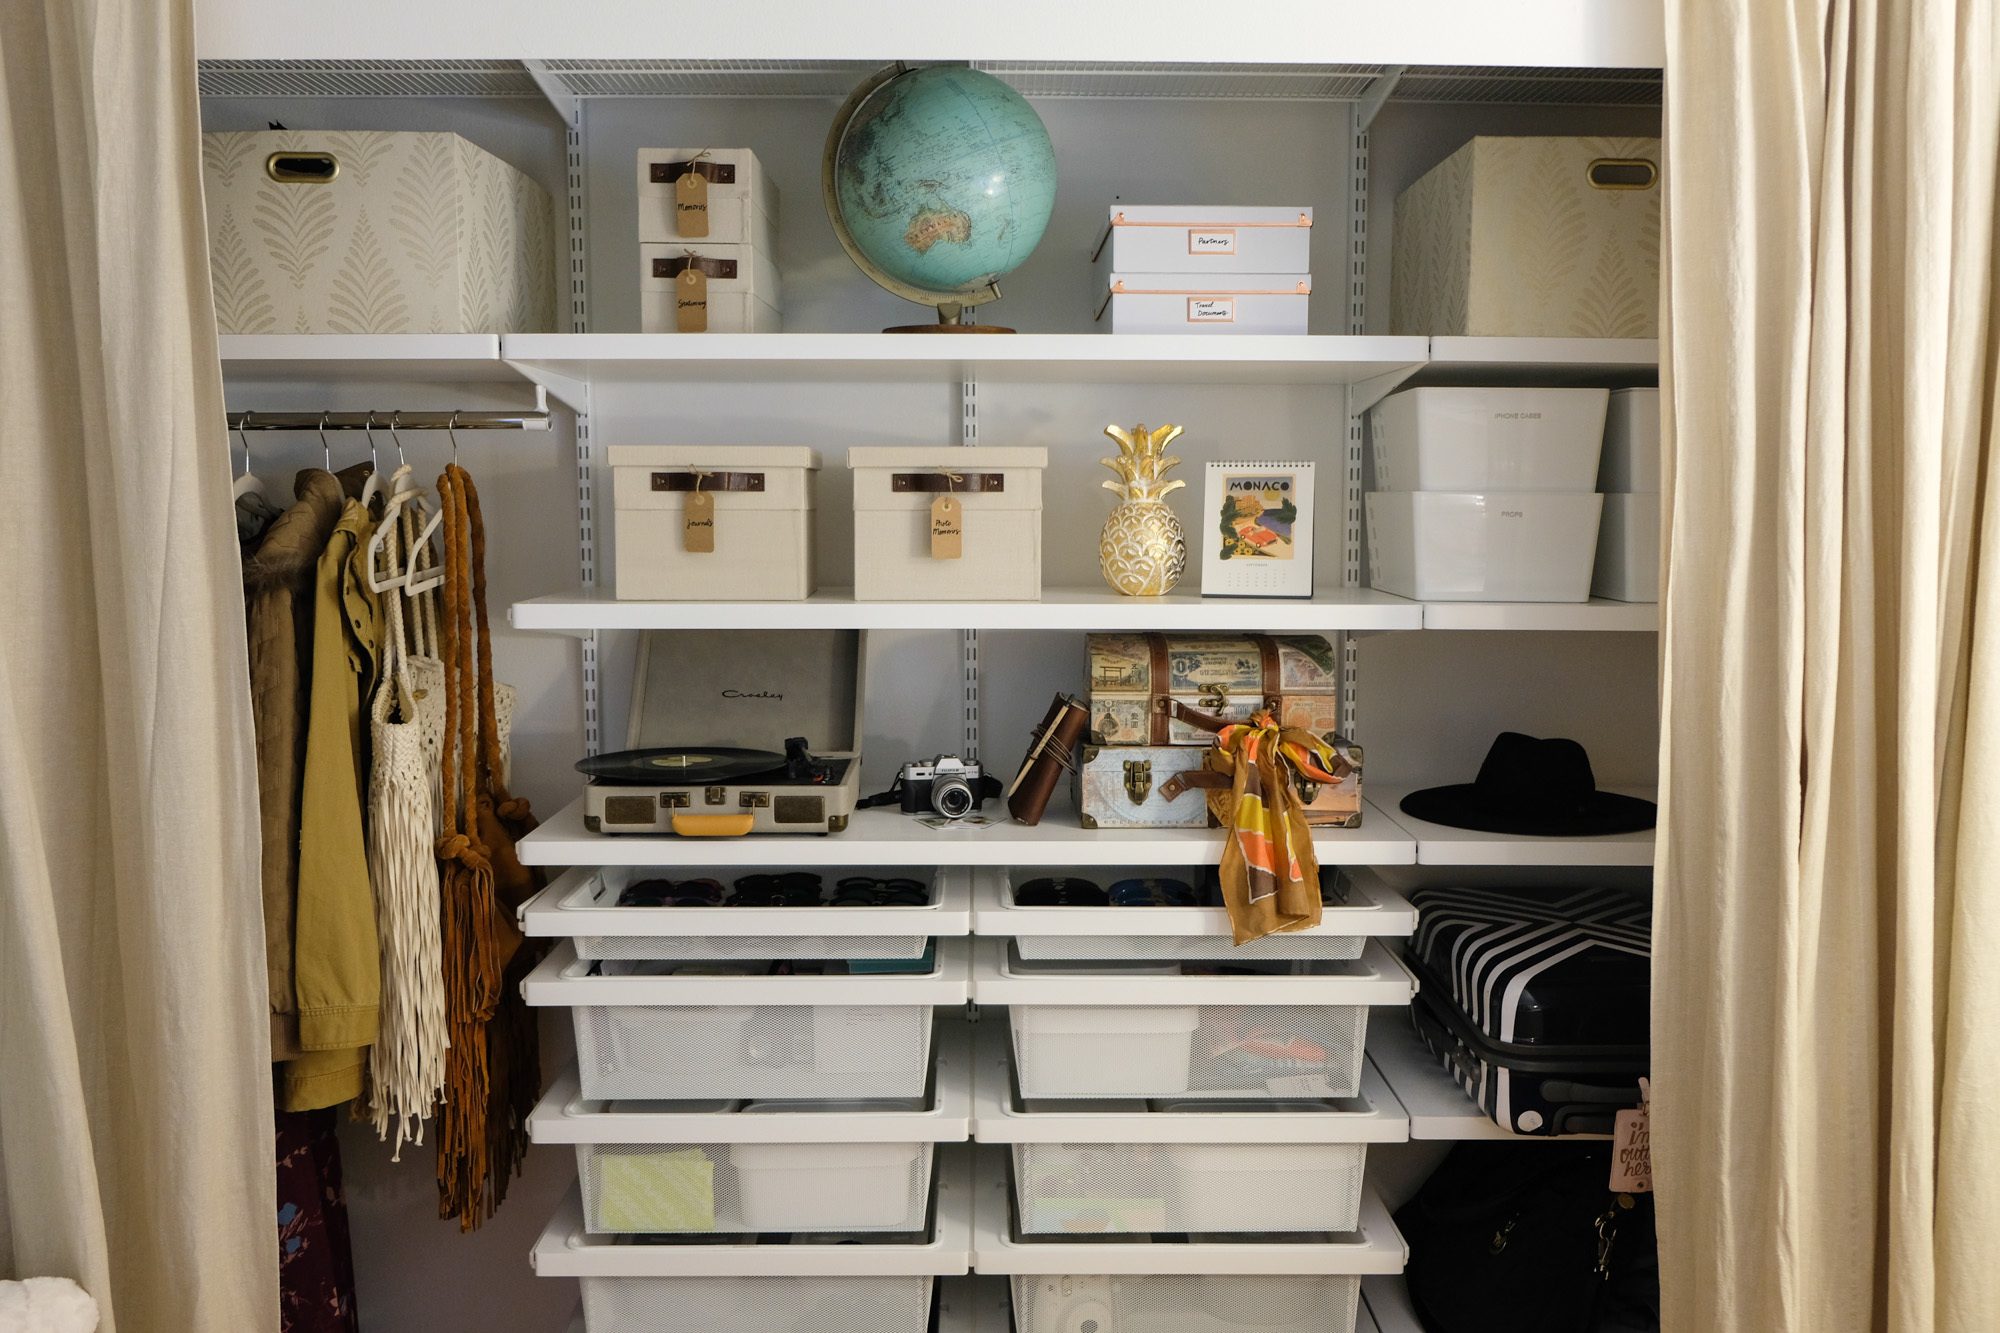 New efla closet from The Container Store